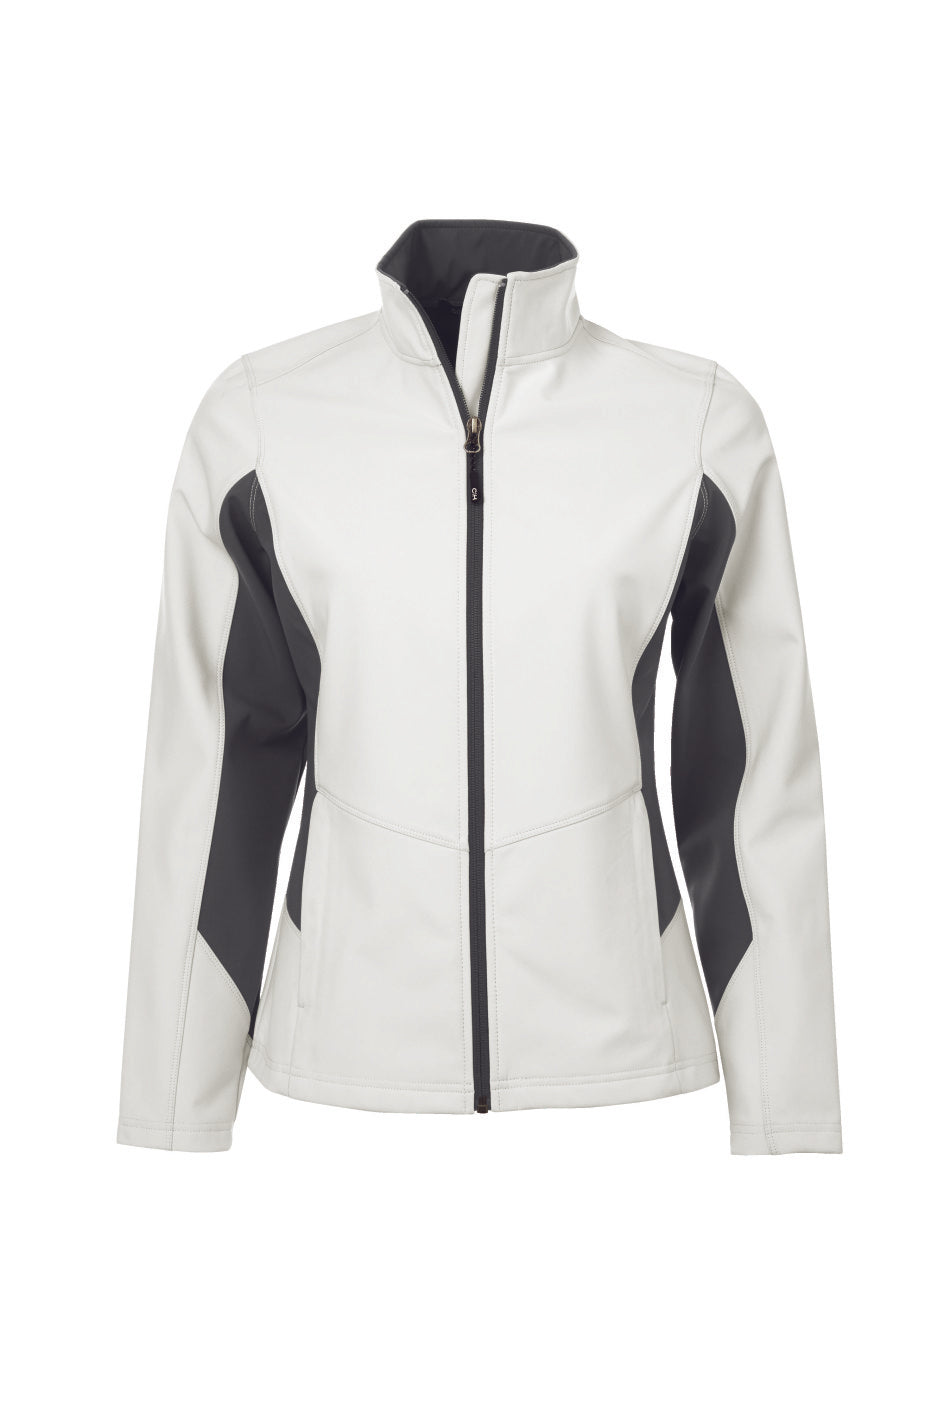 Coal Harbour® Everyday Colour Block Soft Shell Ladies' Jacket